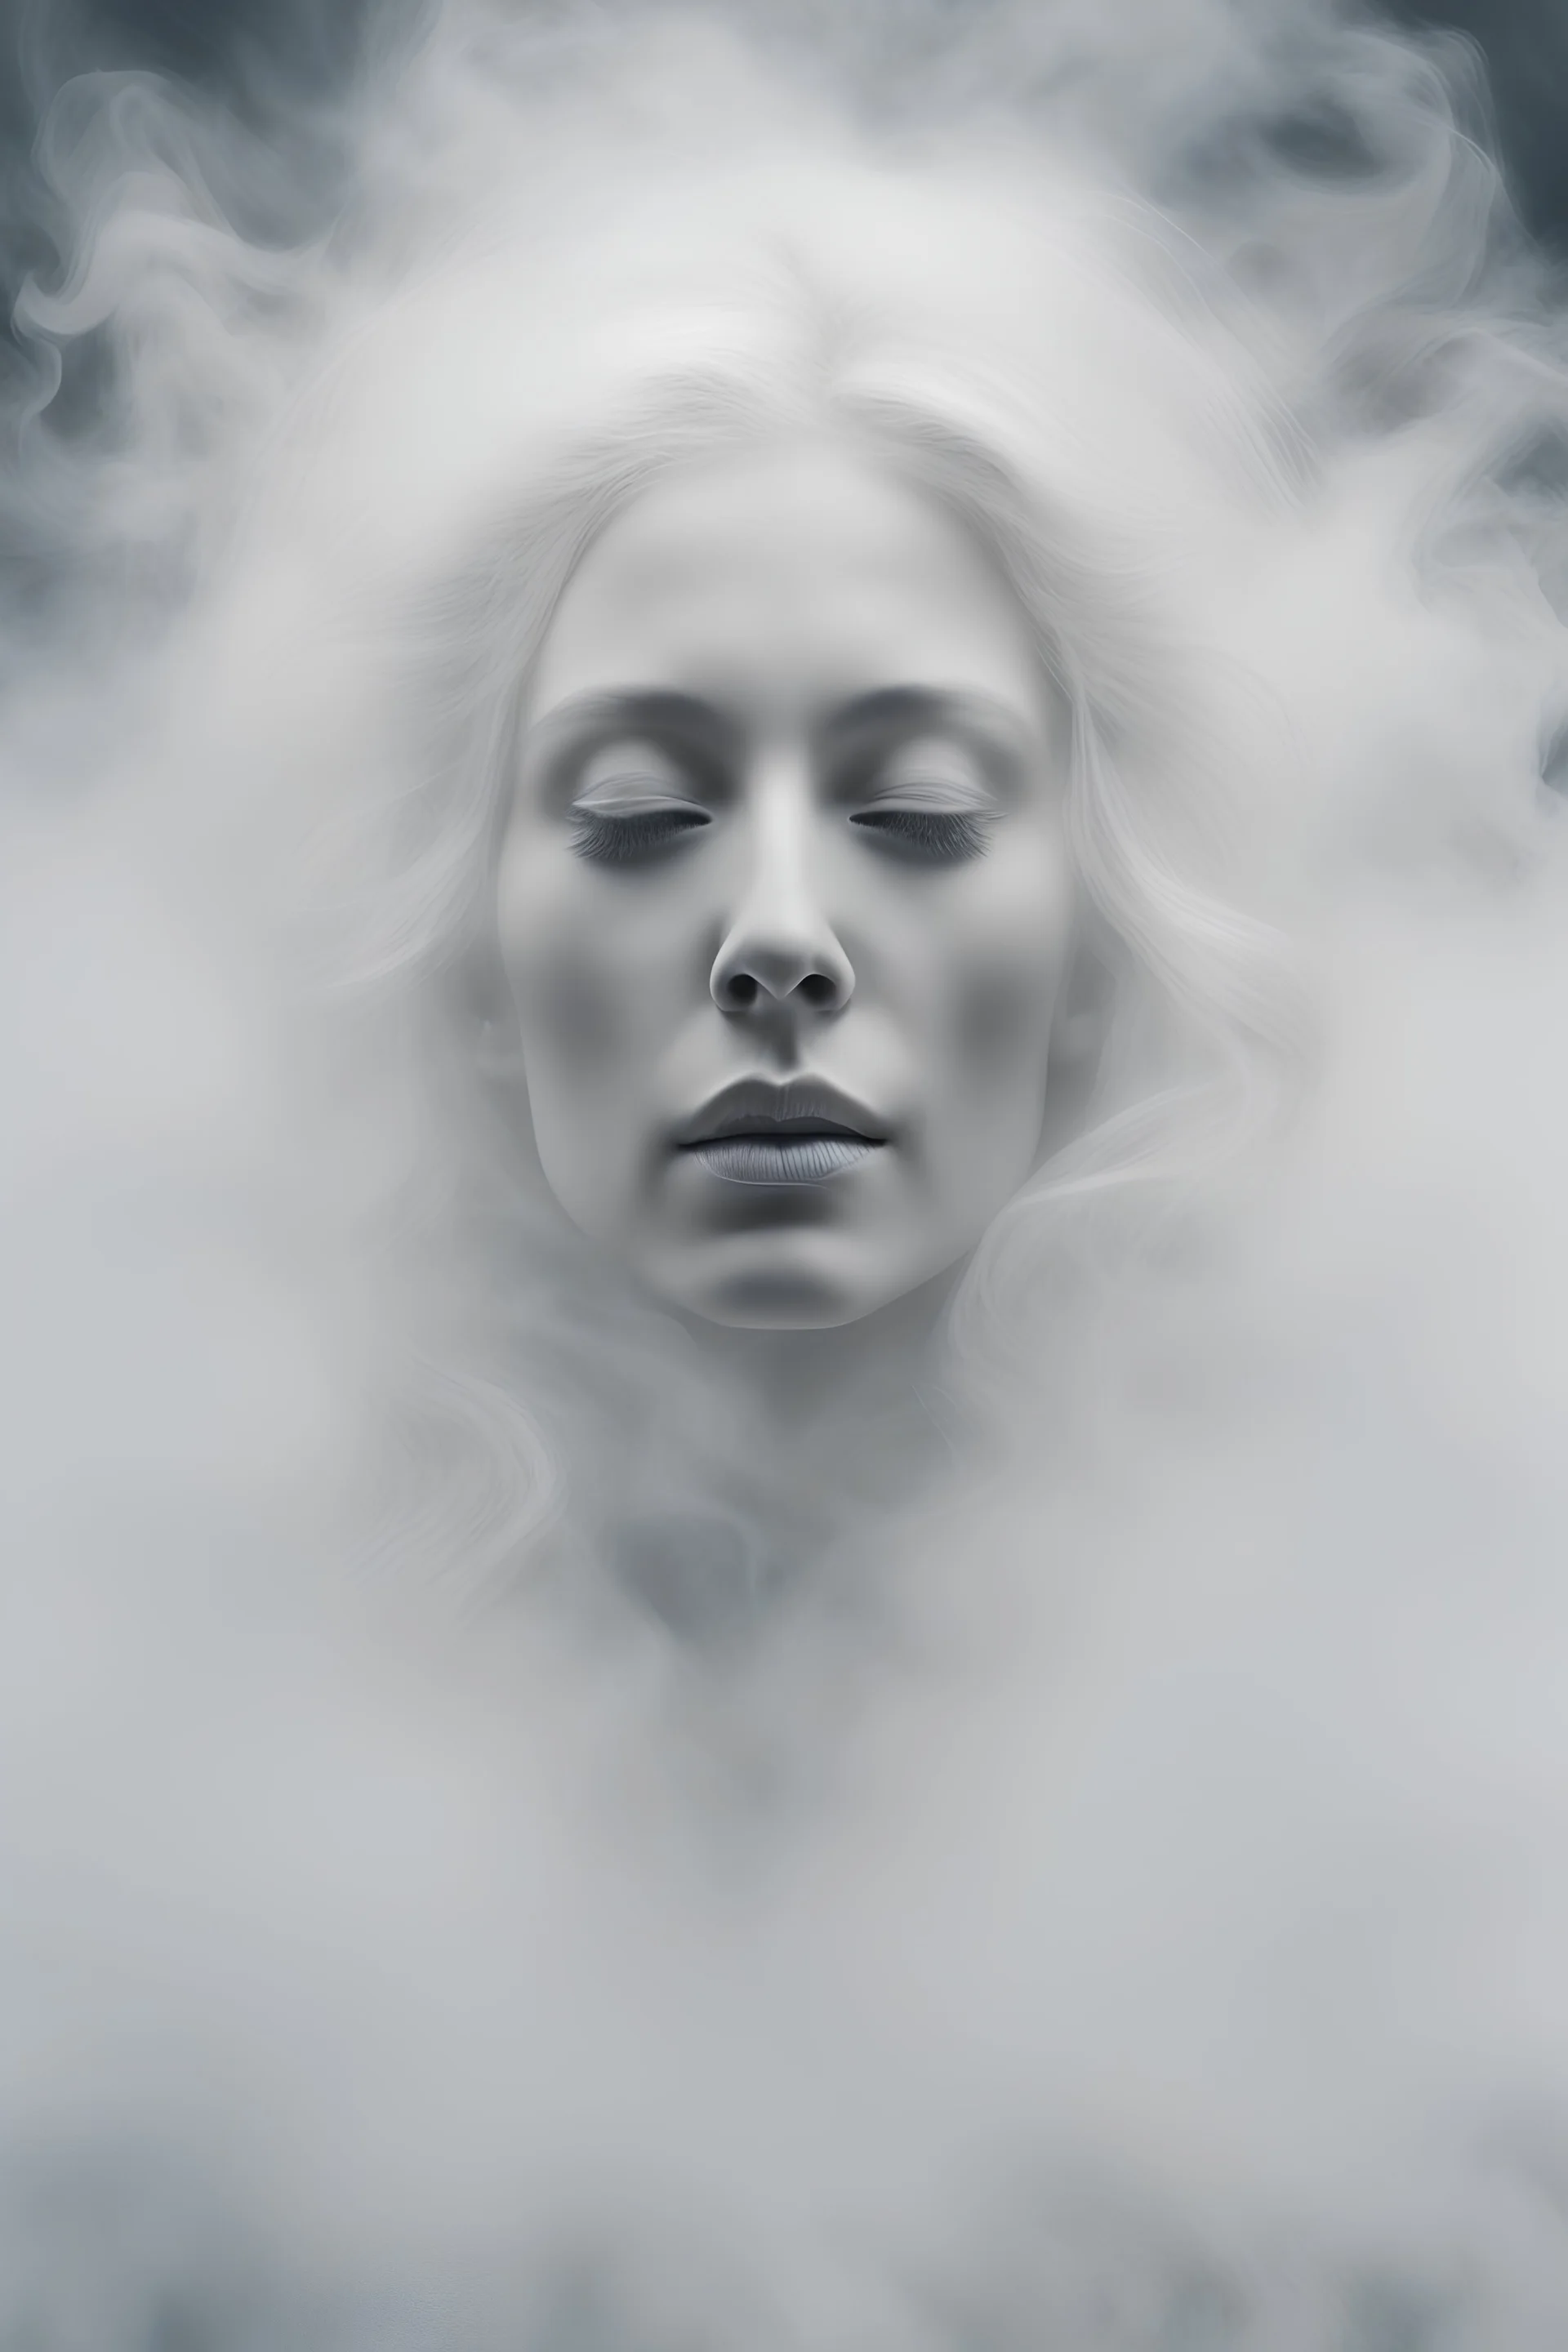 translucent female face barely visible from very dense white smoke and fog, translucent ghost-like face with lots of white hair, lots of fog in the background, surreal style